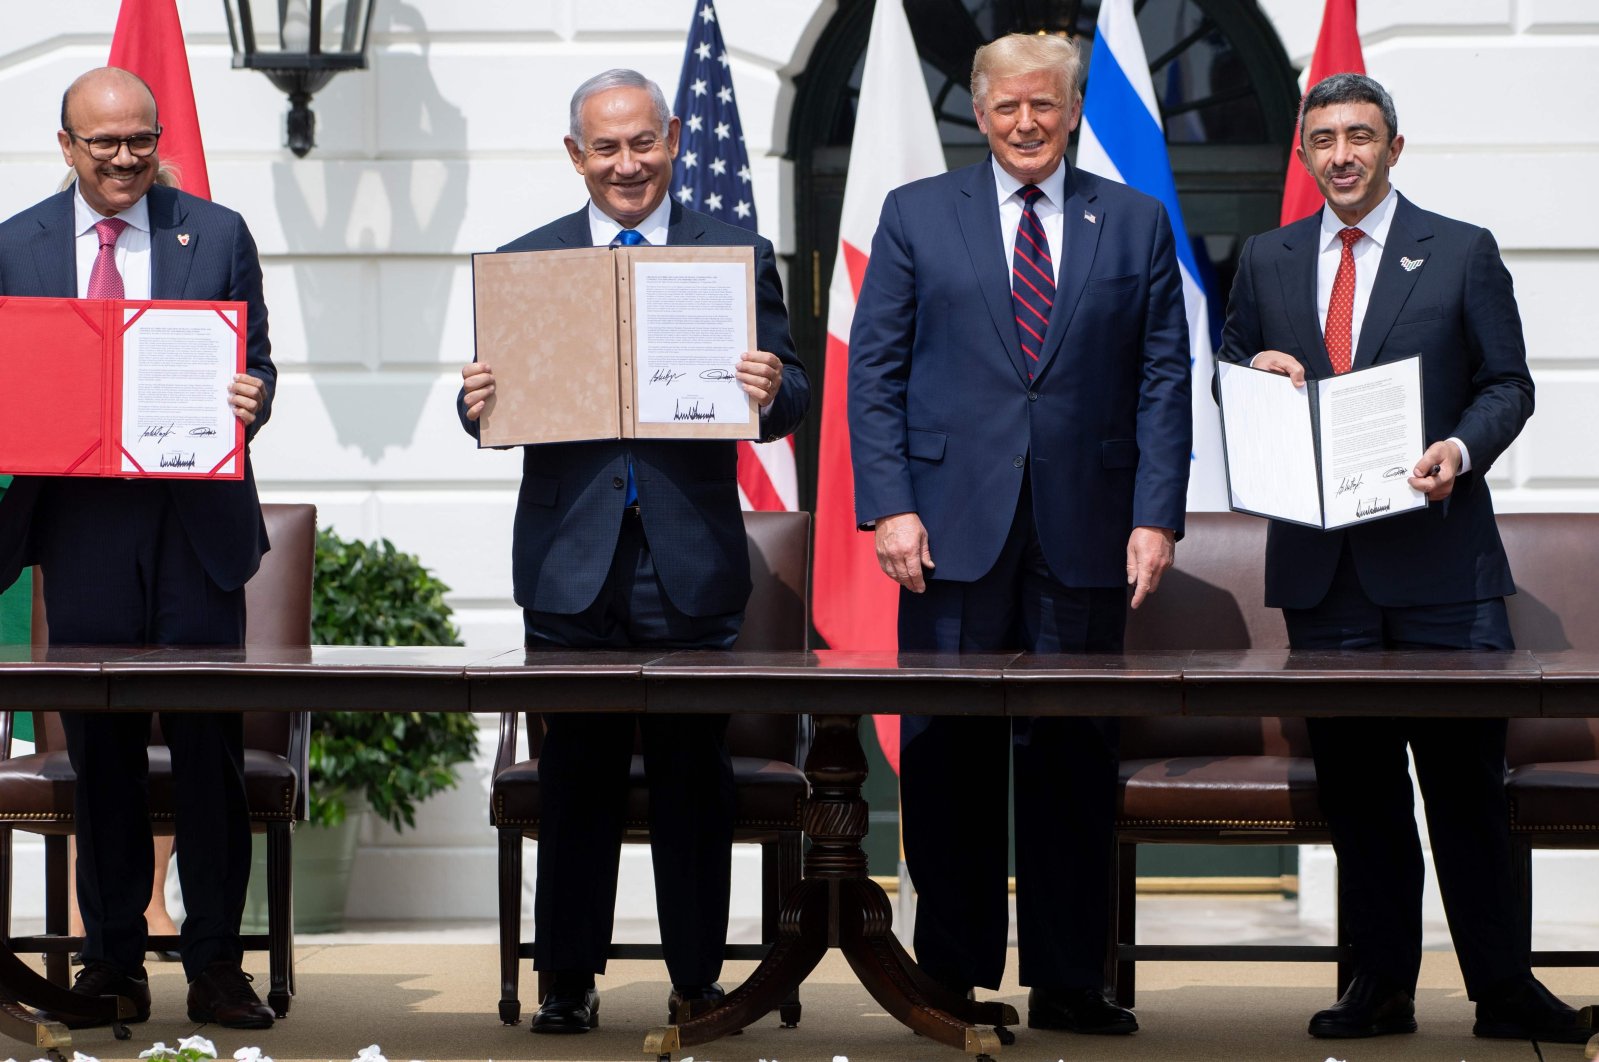 (L-R) Bahrain Foreign Minister Abdullatif al-Zayani, Israeli Prime Minister Benjamin Netanyahu, U.S. President Donald Trump, and UAE Foreign Minister Abdullah bin Zayed Al-Nahyan hold up documents after participating in the signing of the Abraham Accords where Bahrain and UAE recognize Israel, at the White House in Washington, D.C., Sept. 15, 2020. (AFP Photo)